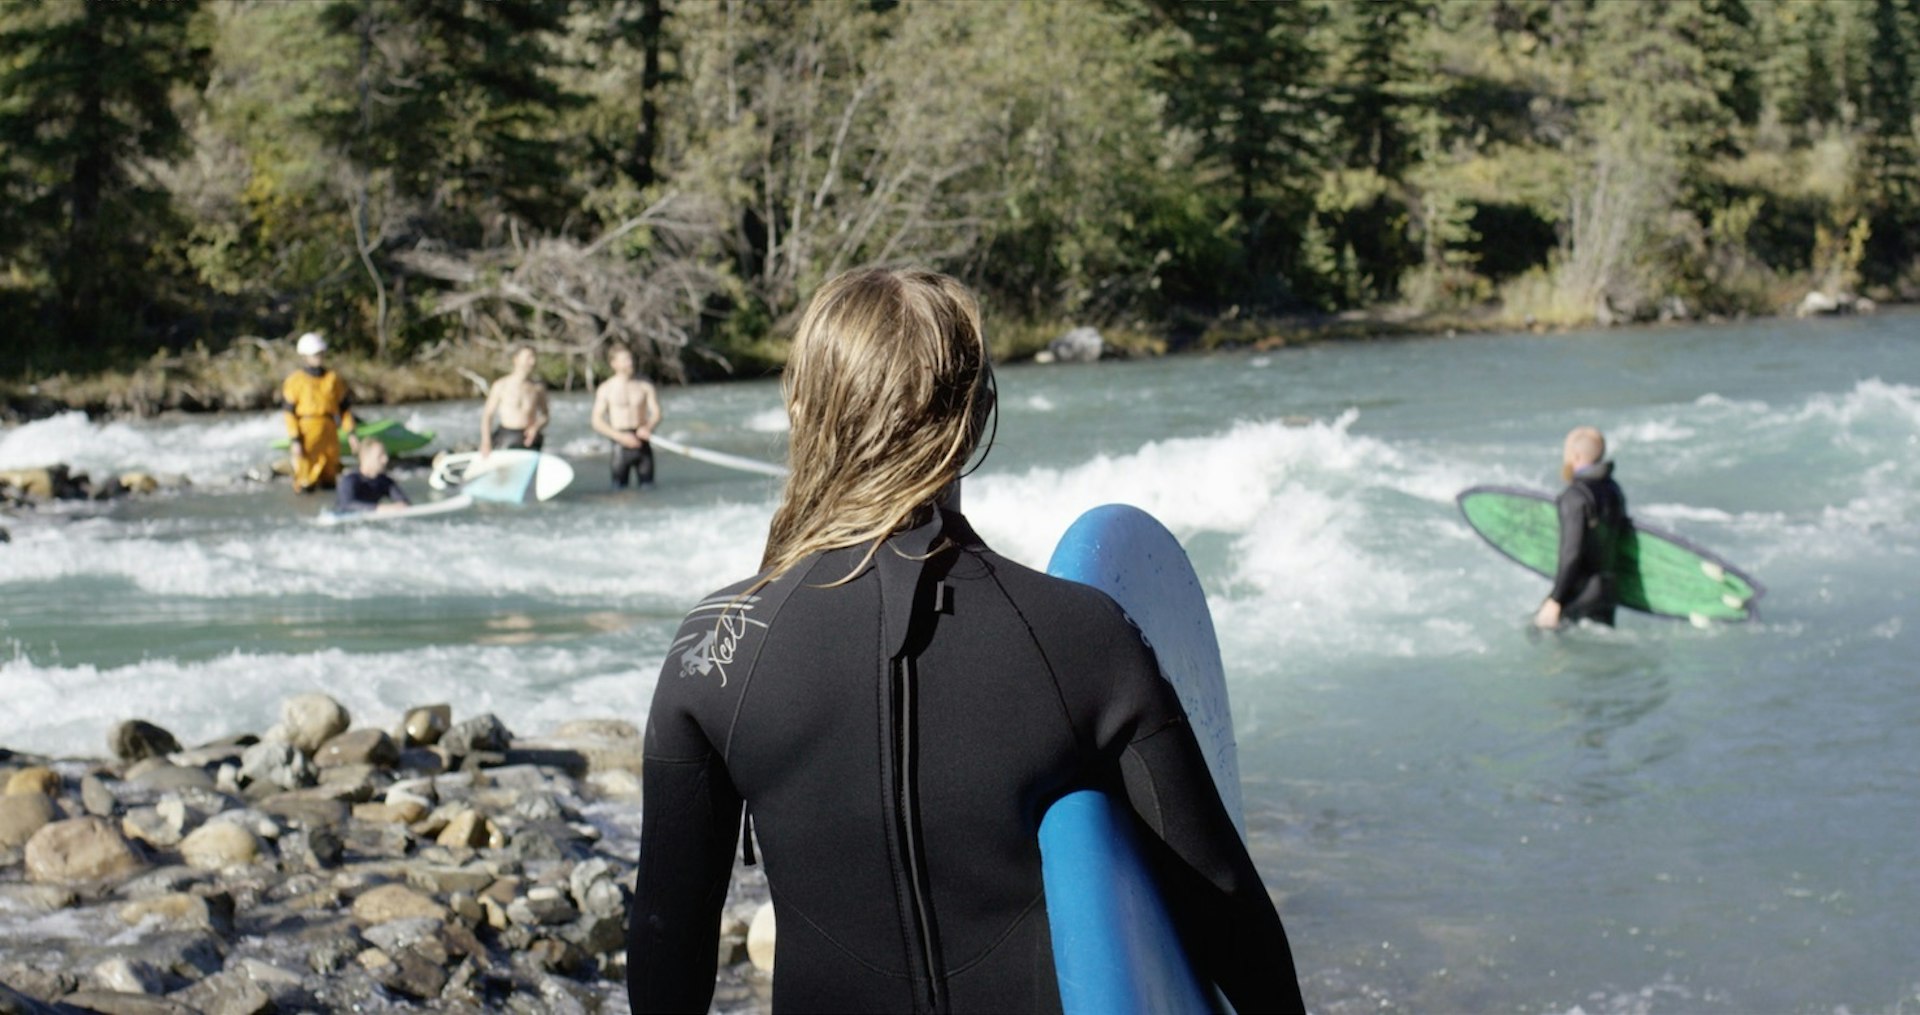 Video: Surfing in the Rockies